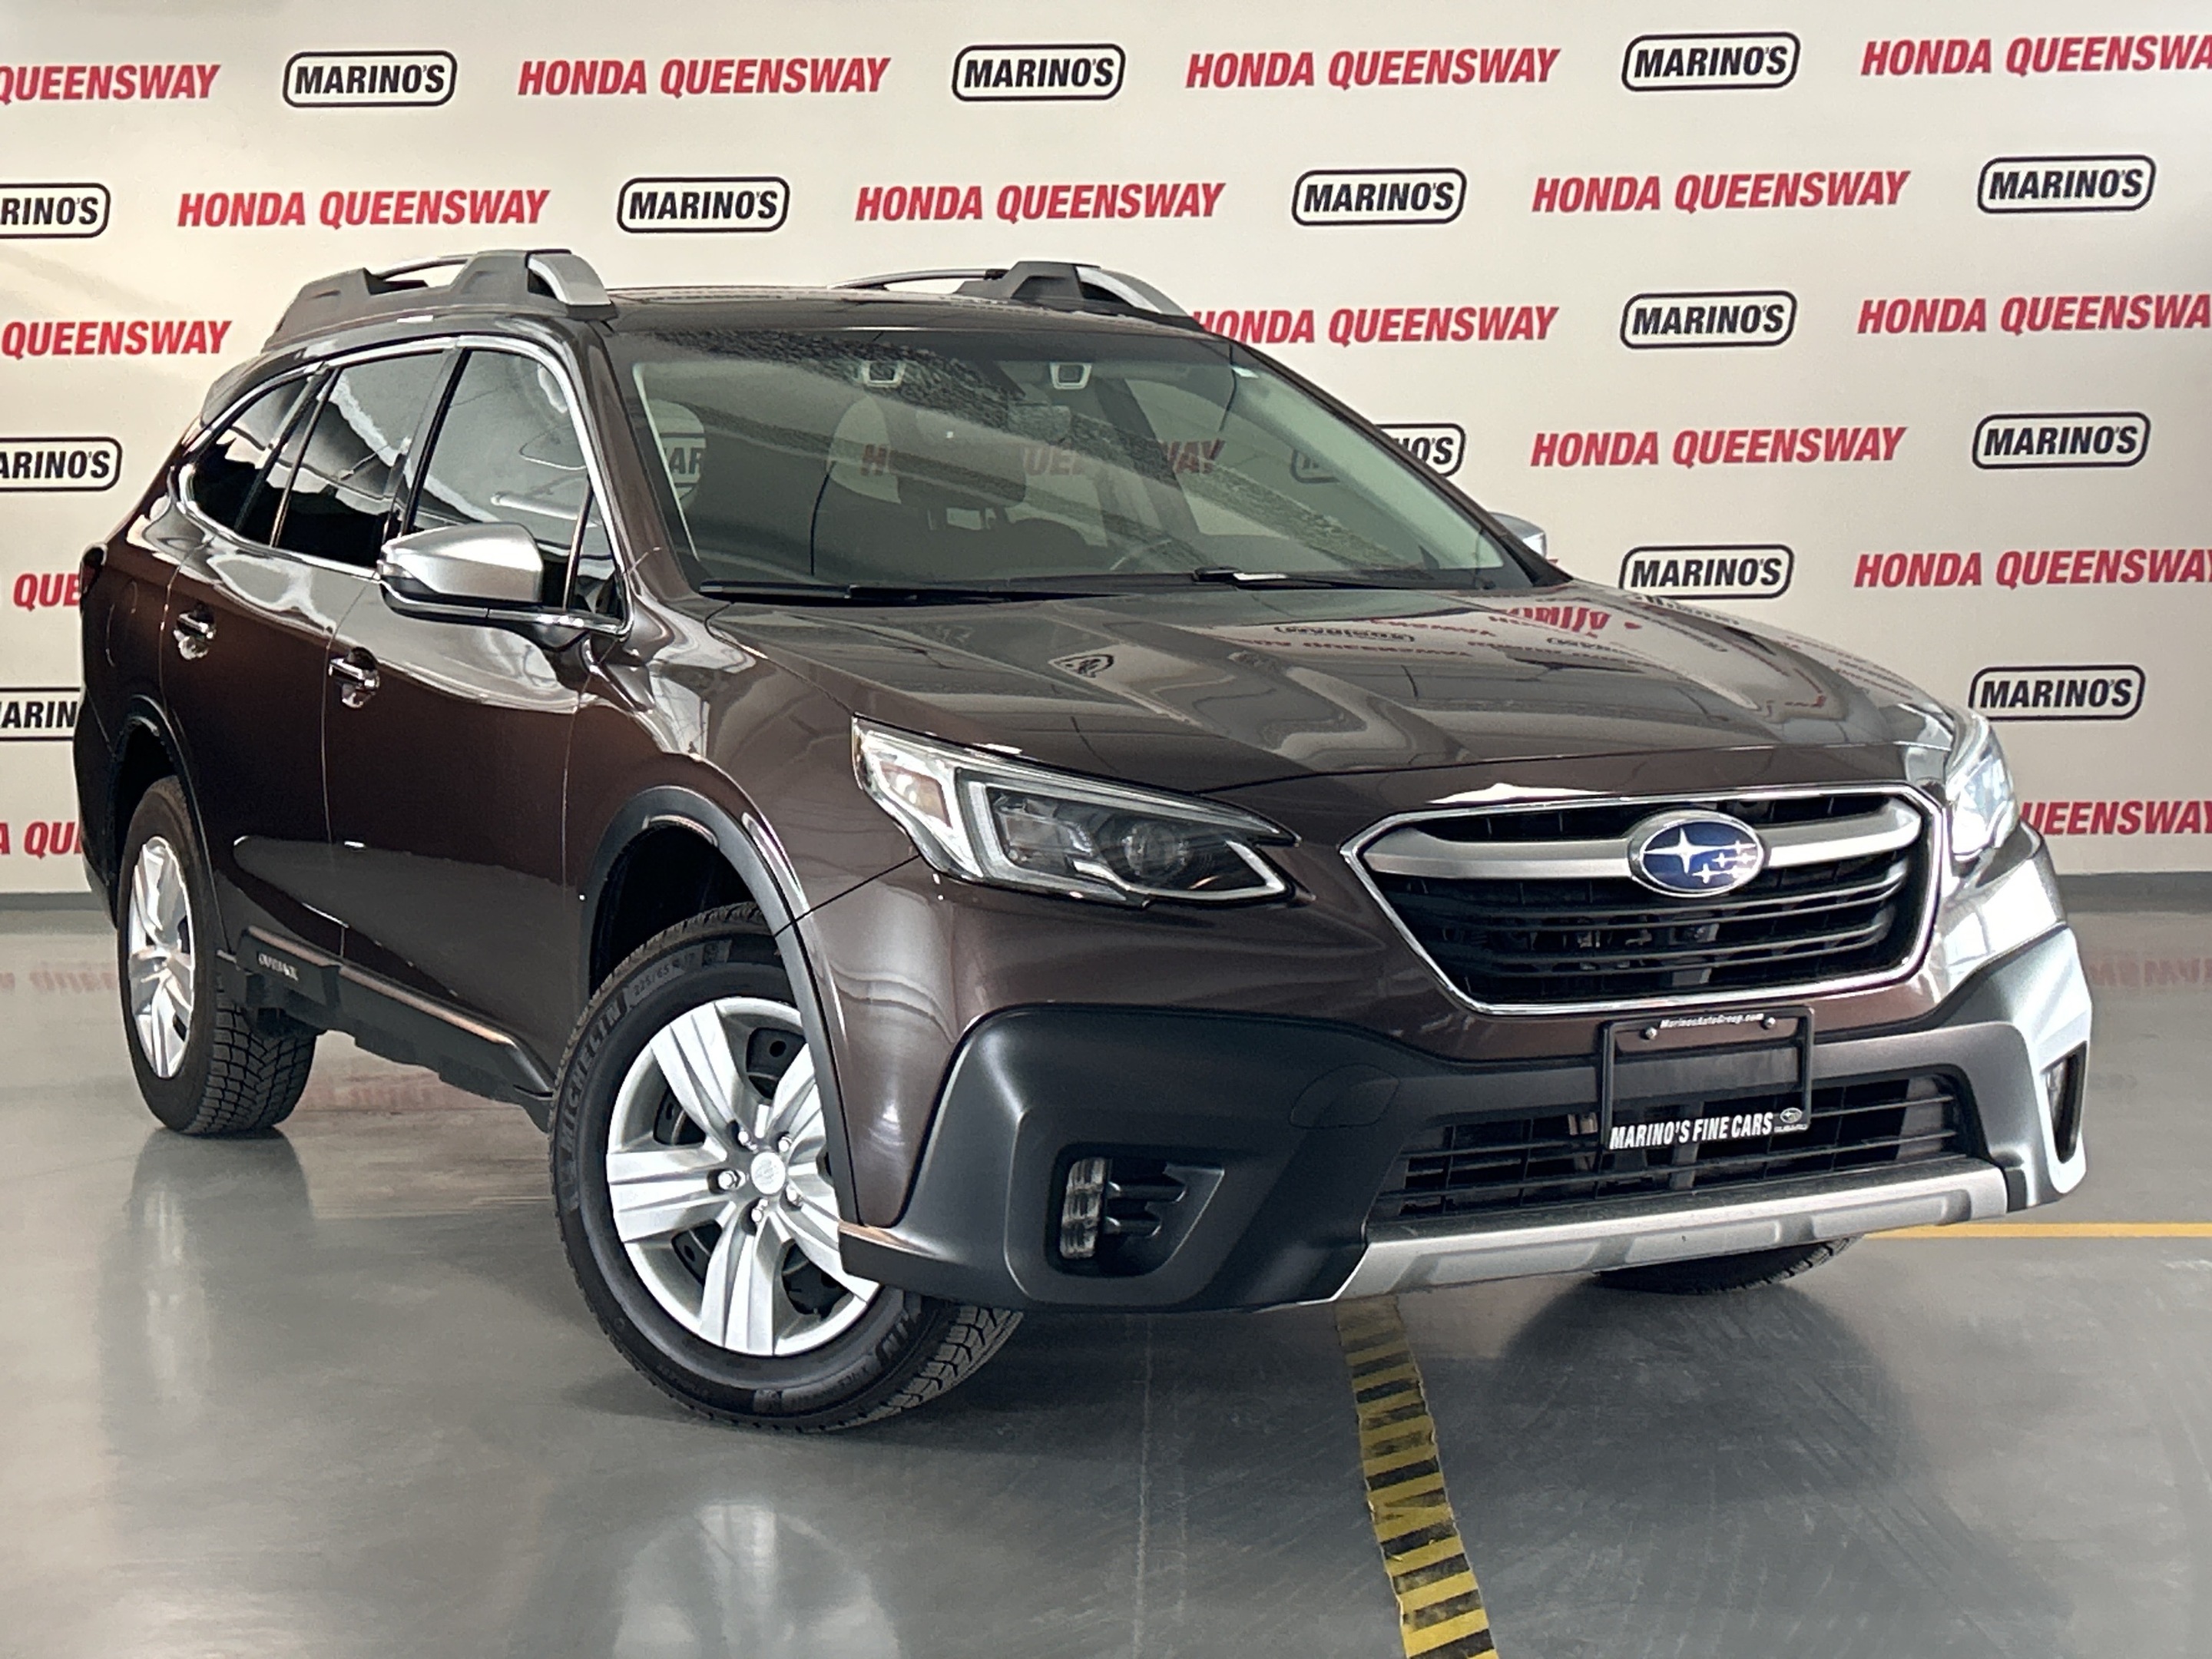 2020 Subaru Outback Premier XT/AS IS/Leather/2 Sets of Tires/NAV